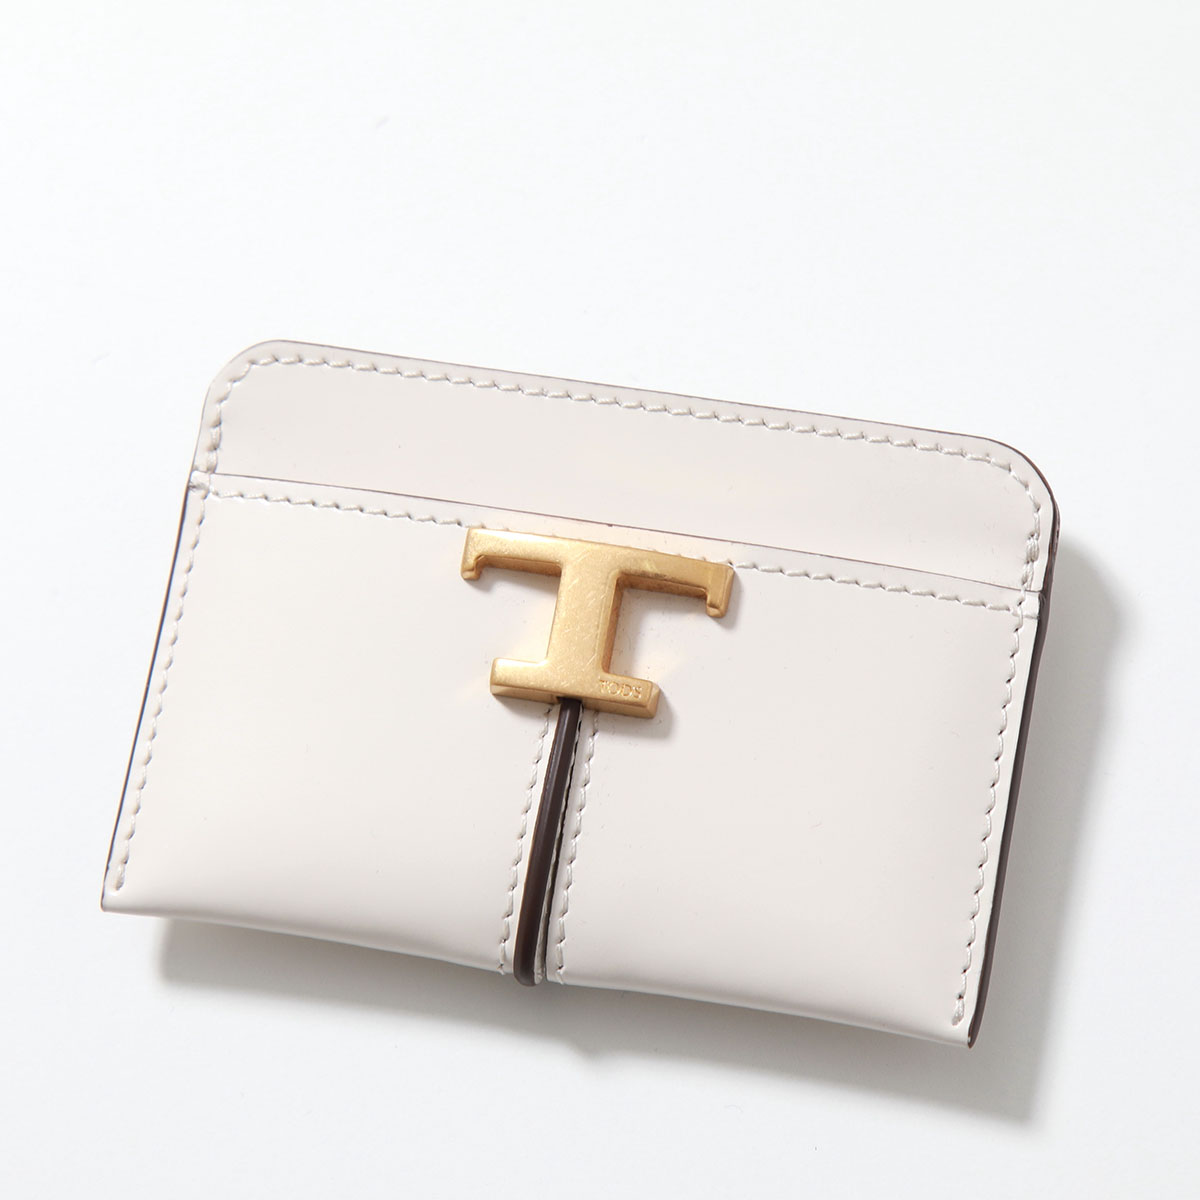 TODS トッズ カードケース T TIMELESS Tタイムレス XAWTSKF1100KET メ...